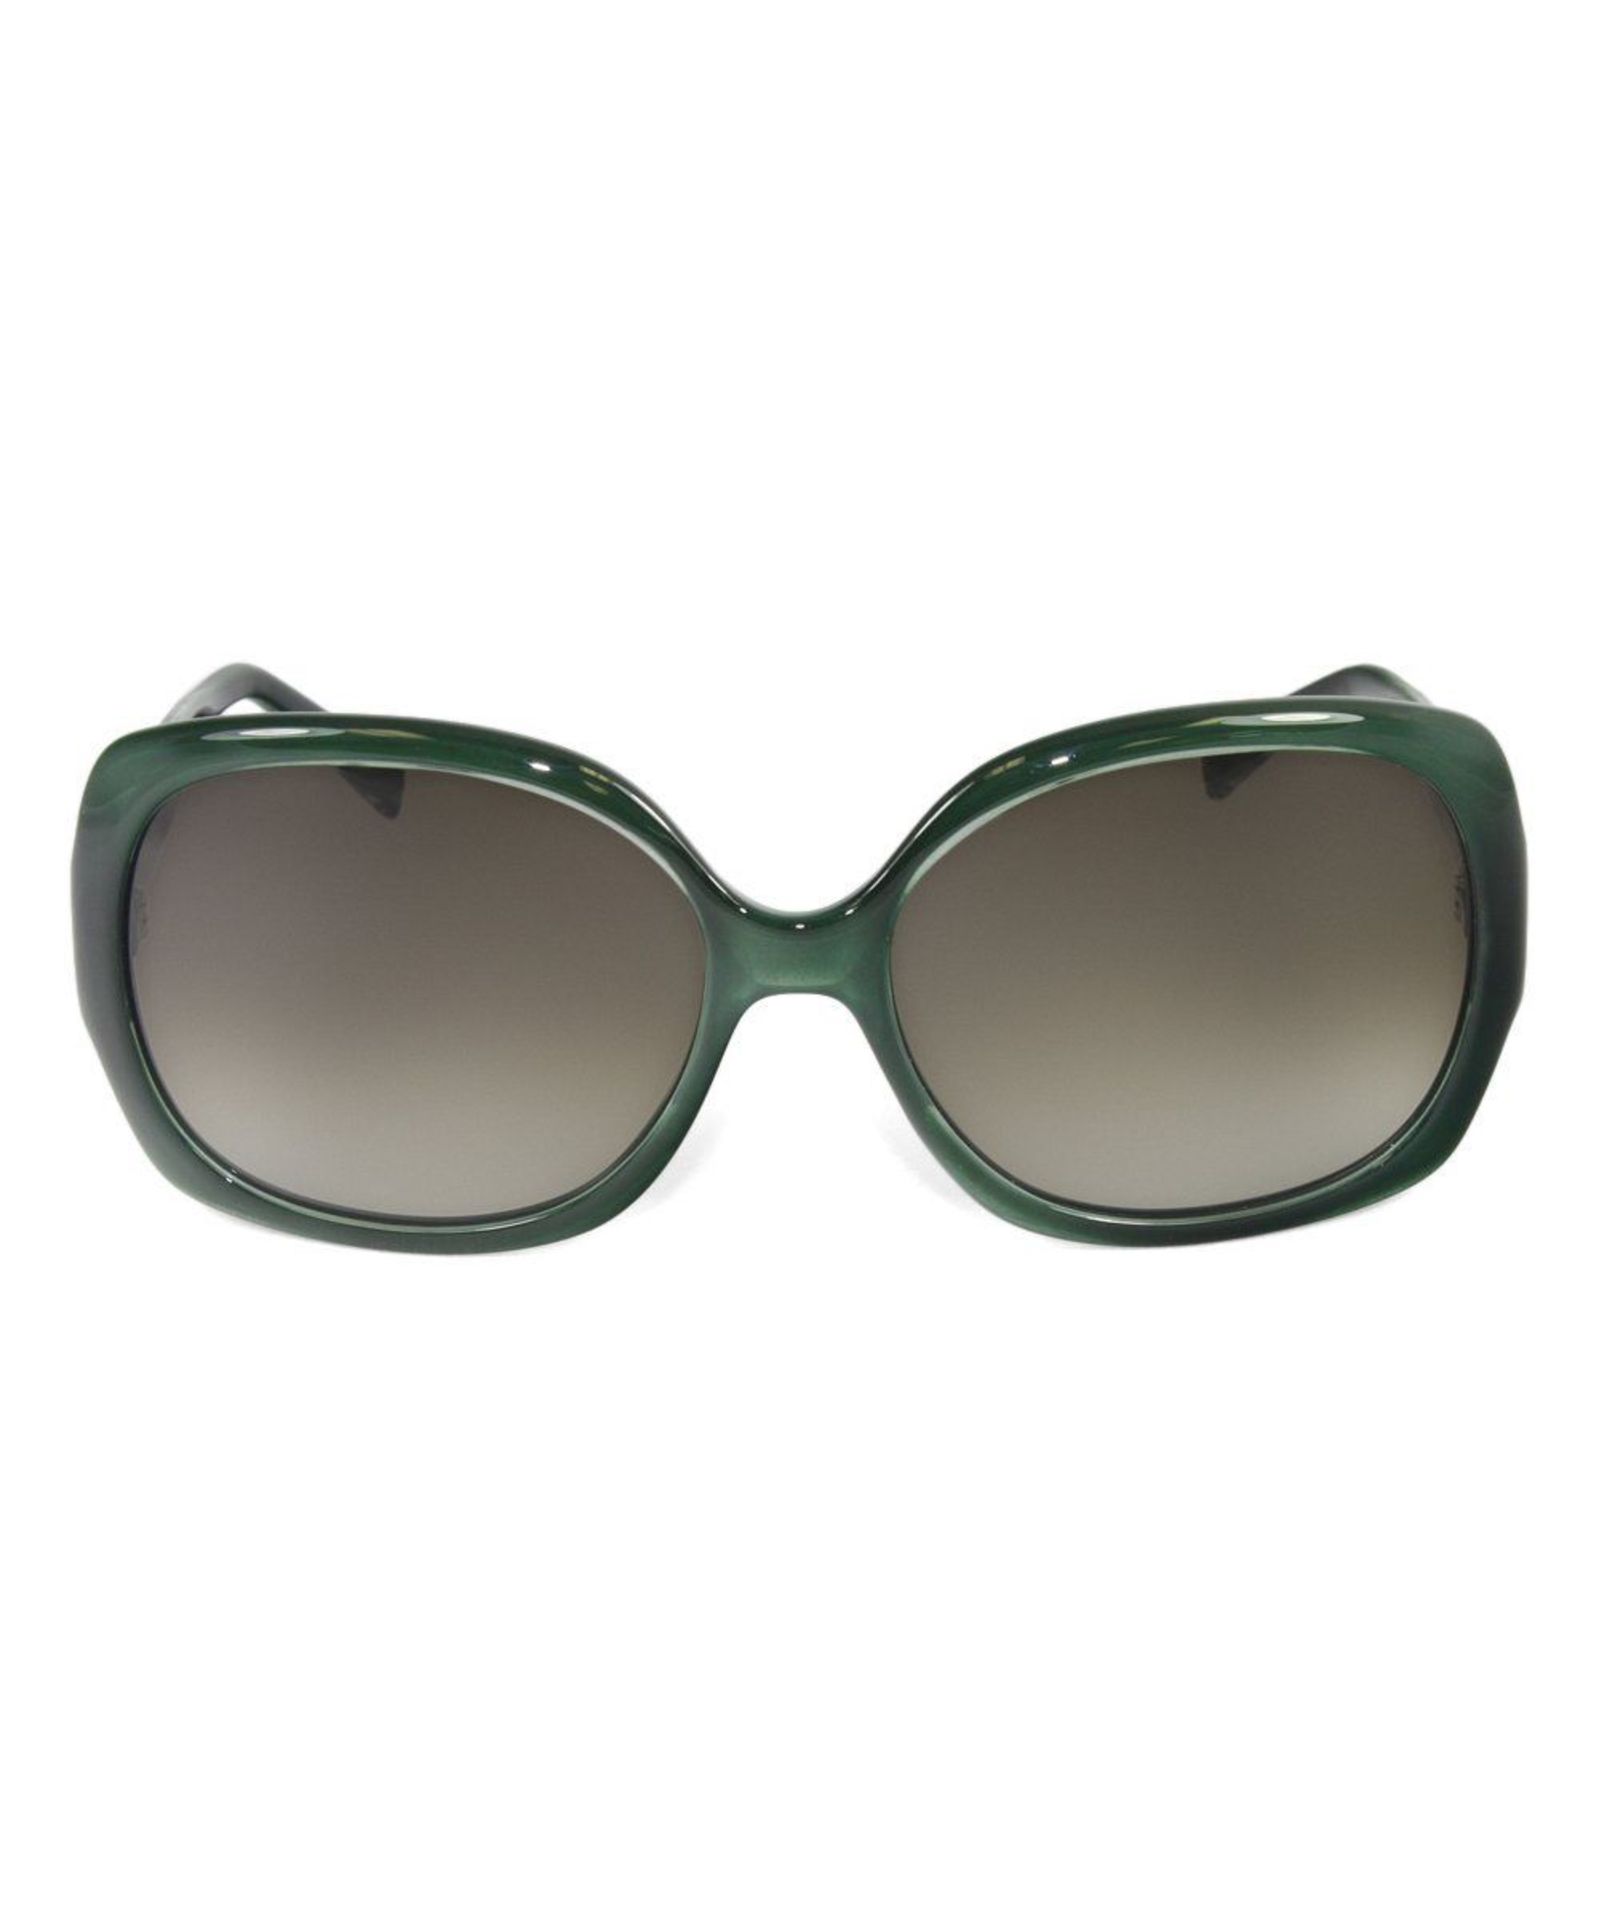 FENDI Green Logo-Arm Oversize Sunglasses (One Size) (New with tags) [Ref: 44966071- TT-] - Image 2 of 2